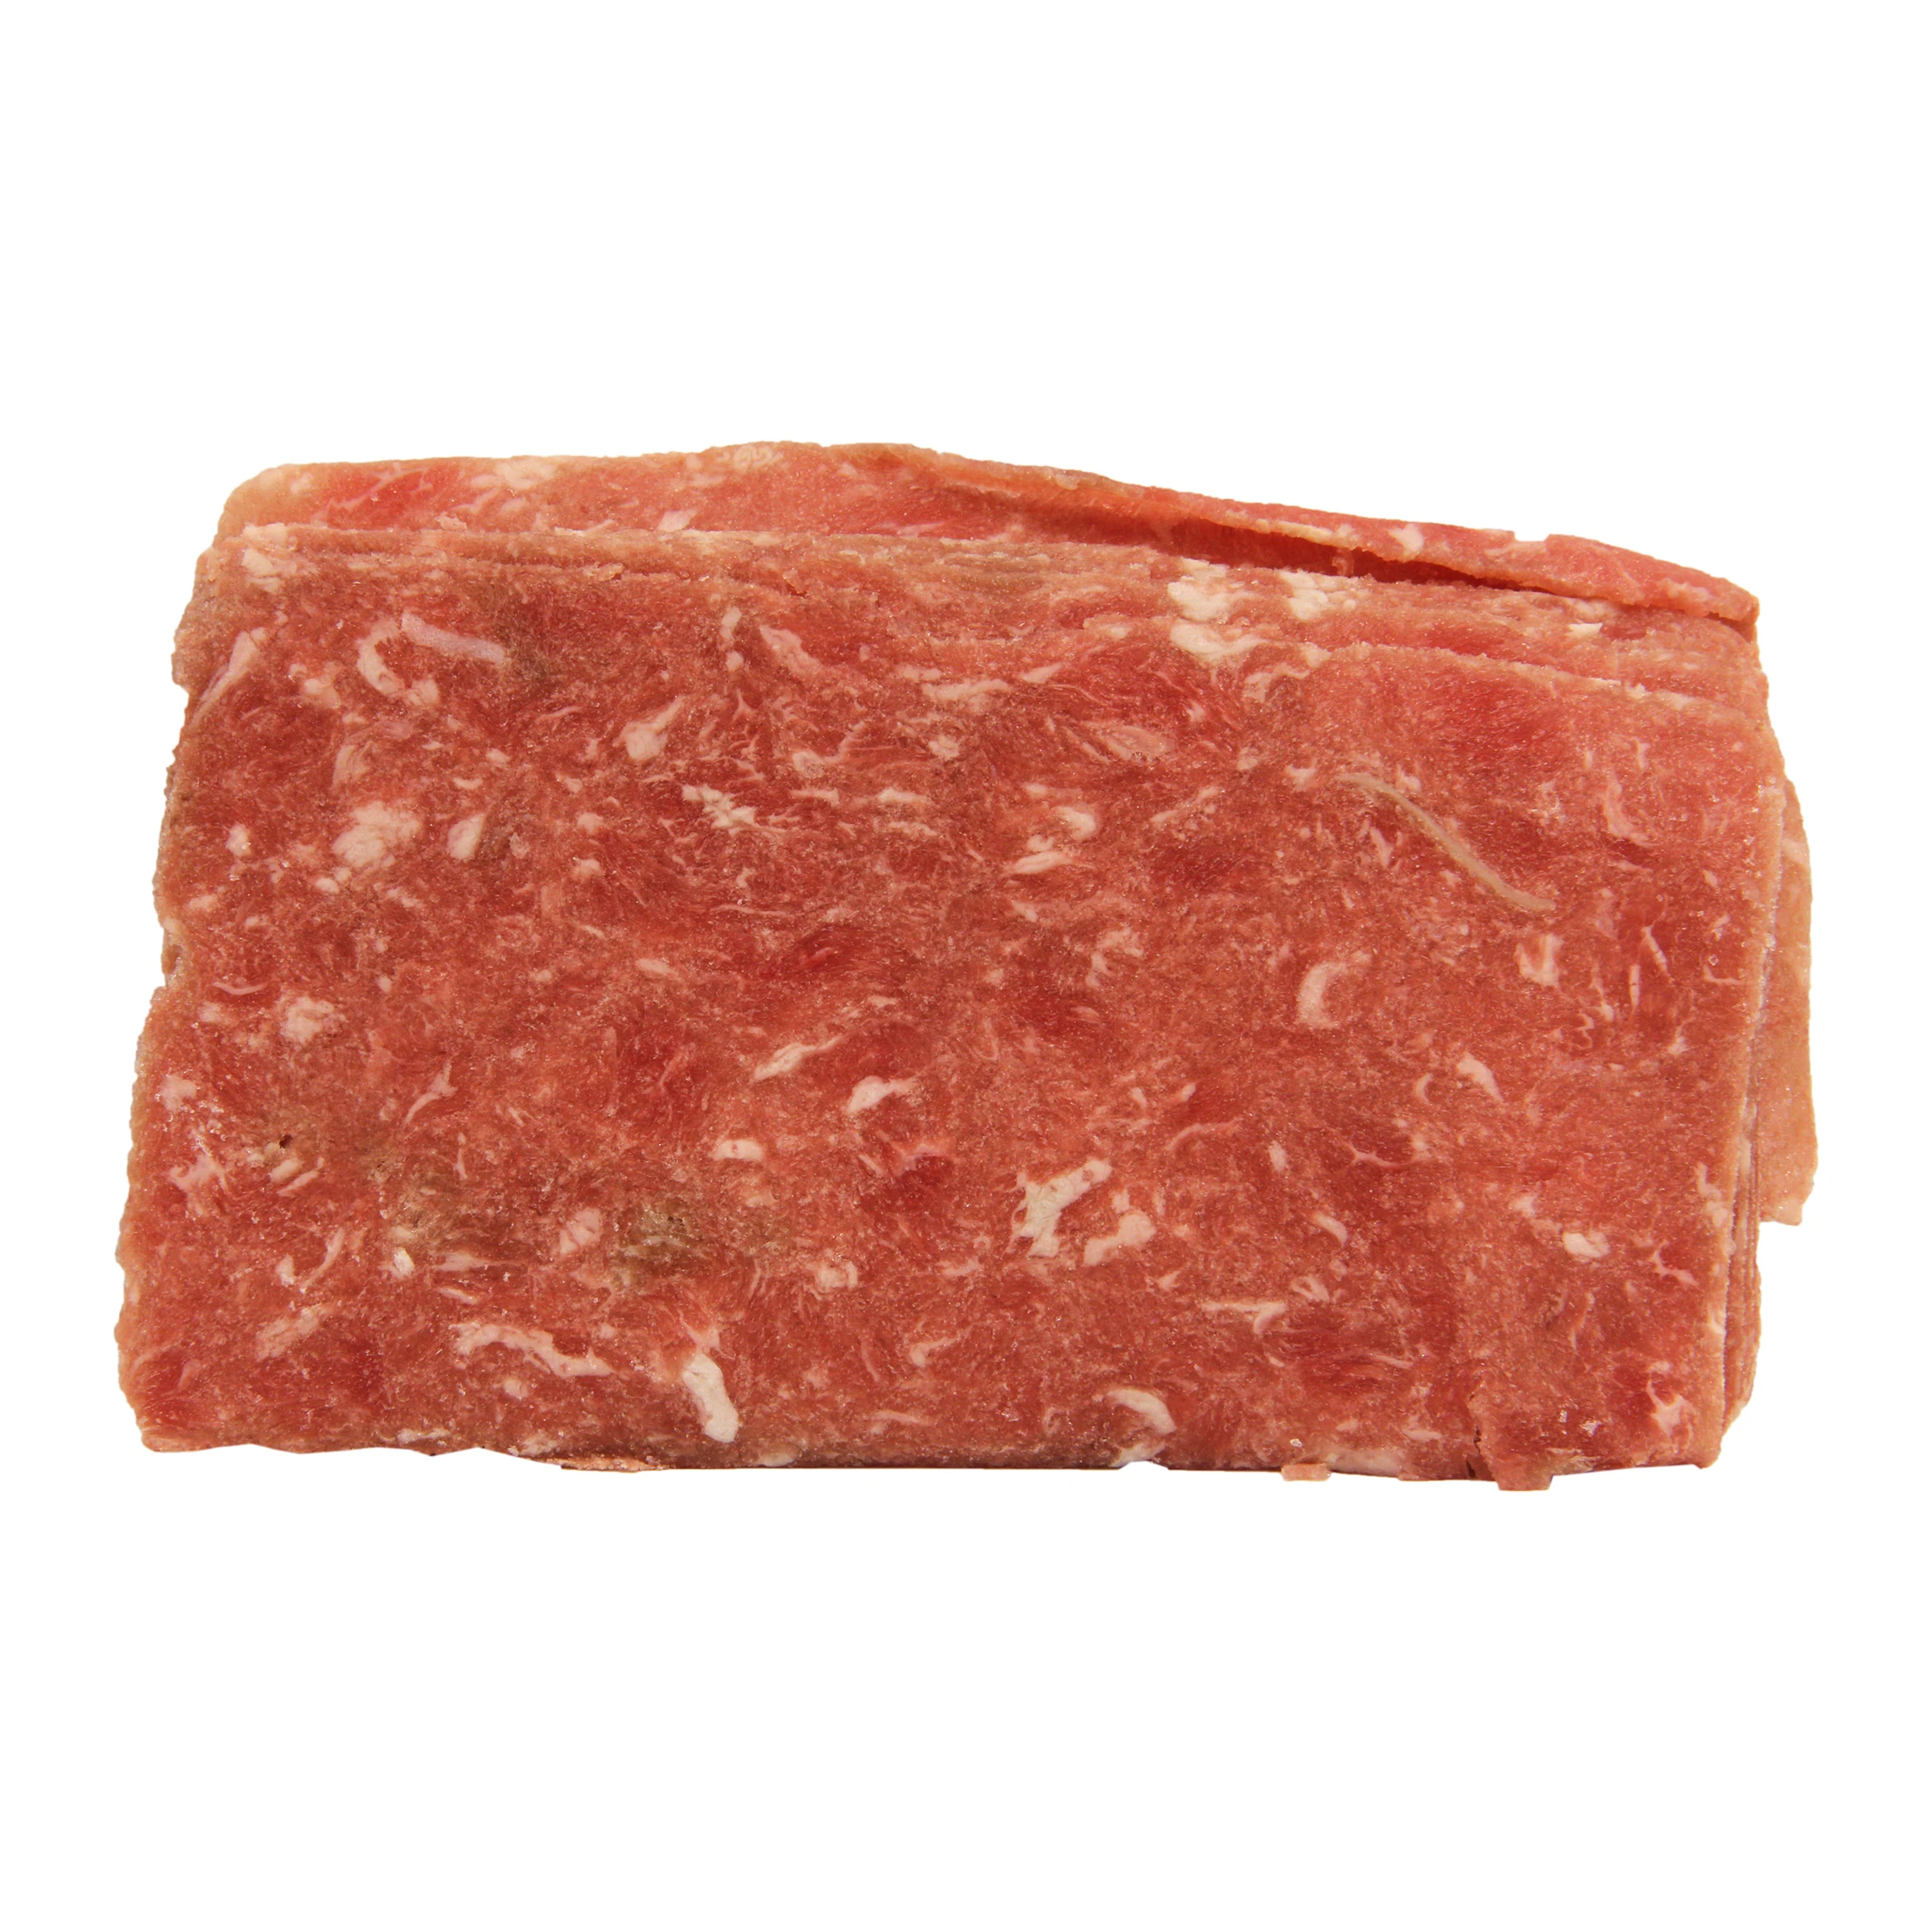 Red Star Sirloin Beef Slices, Lightly Marinated, 8 oz, 10 Lbshttp://images.salsify.com/image/upload/s--WdKVnXyn--/etp4zsbmbivfeacgkrrx.webp